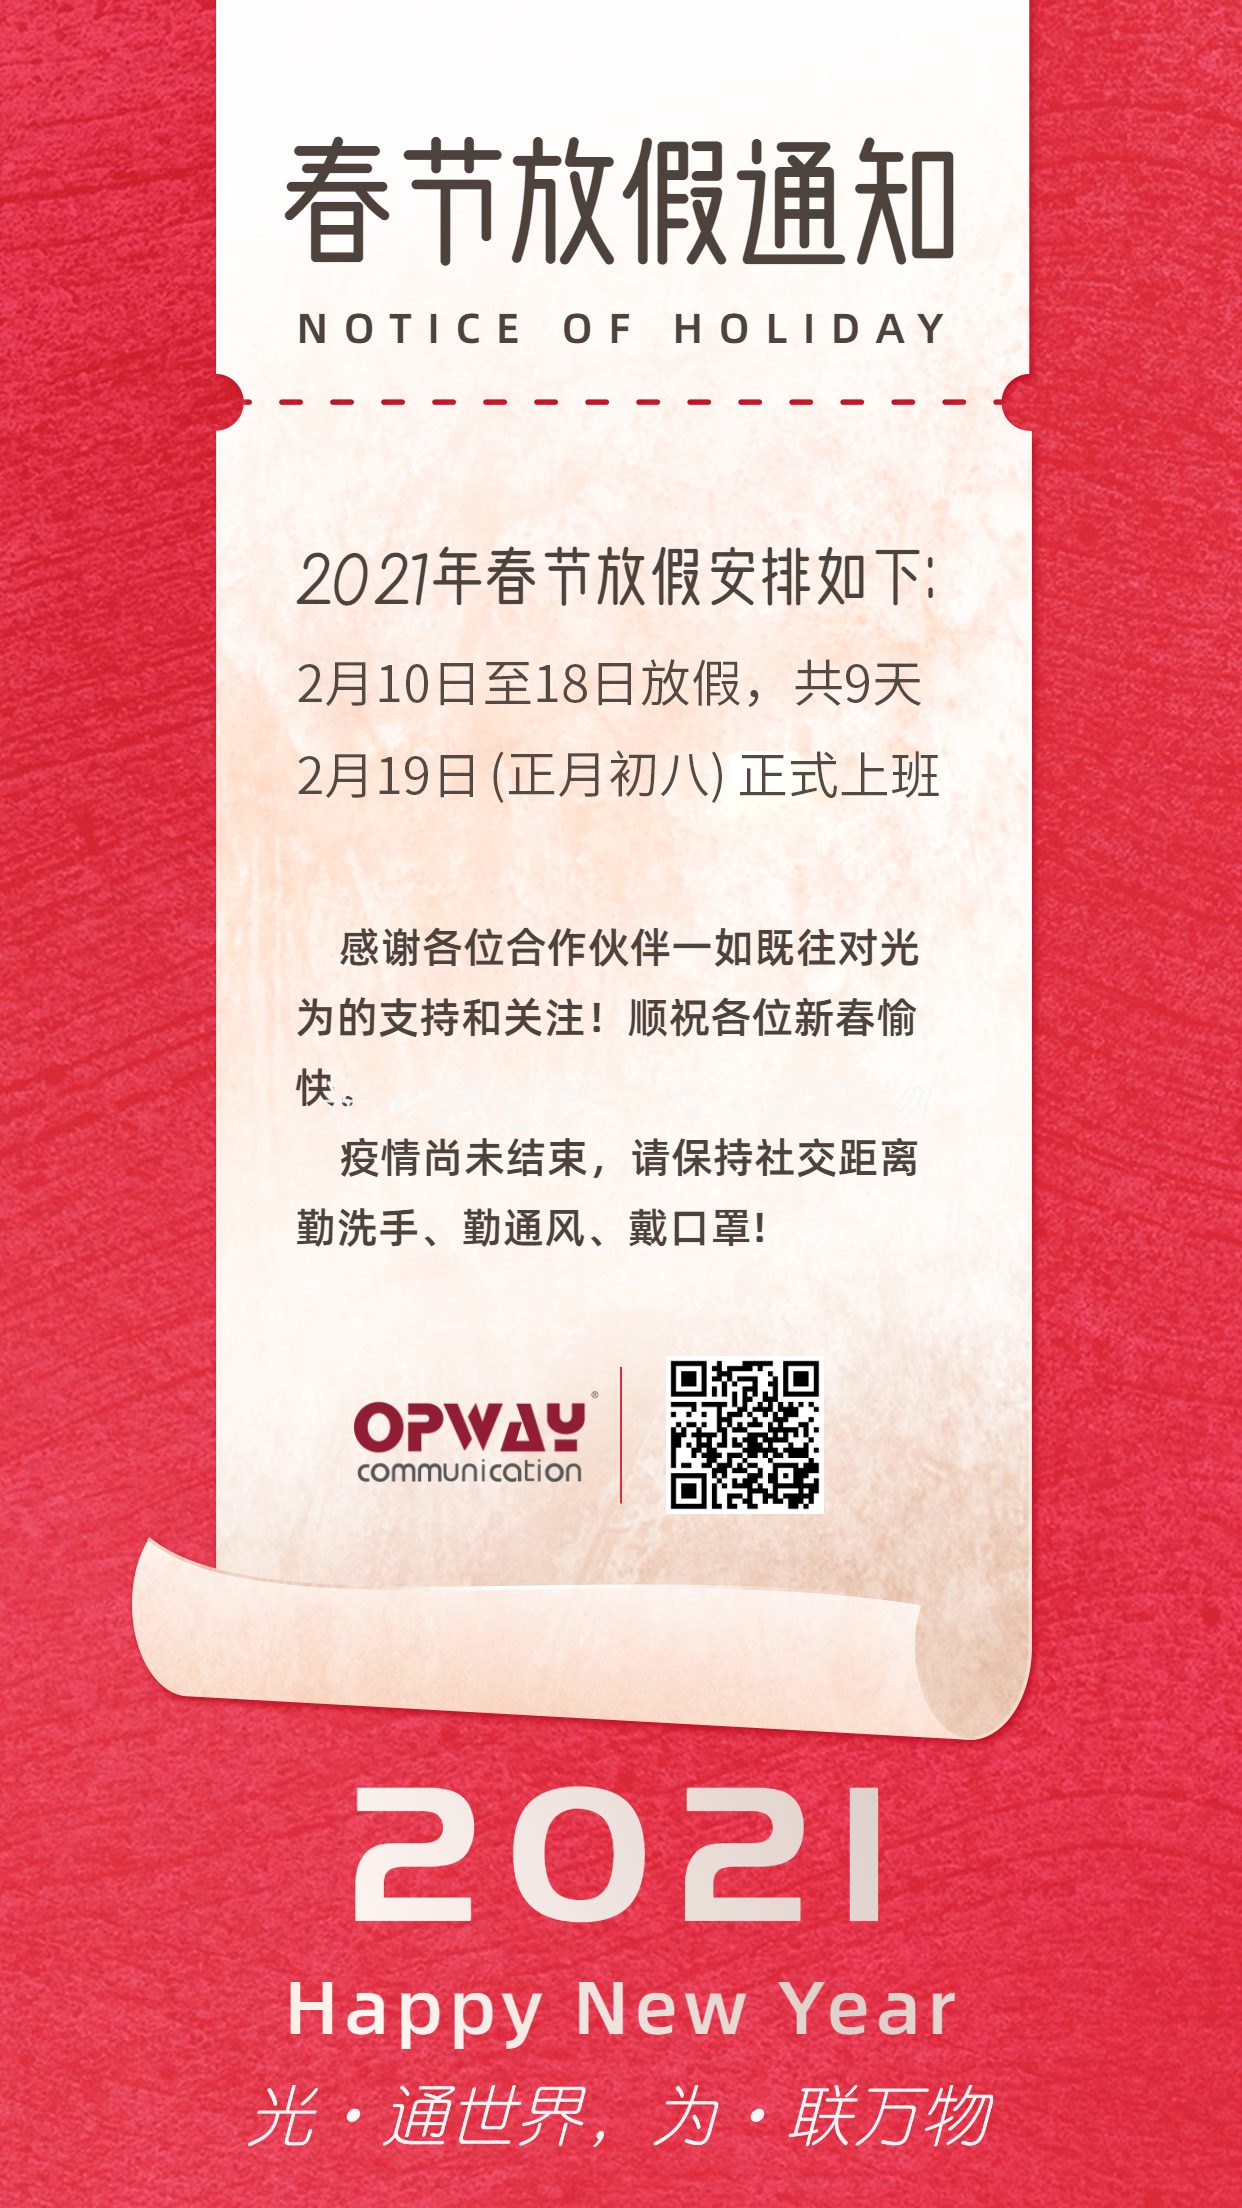 Guangwei Optical Communication 2021 Spring Festival holiday notice